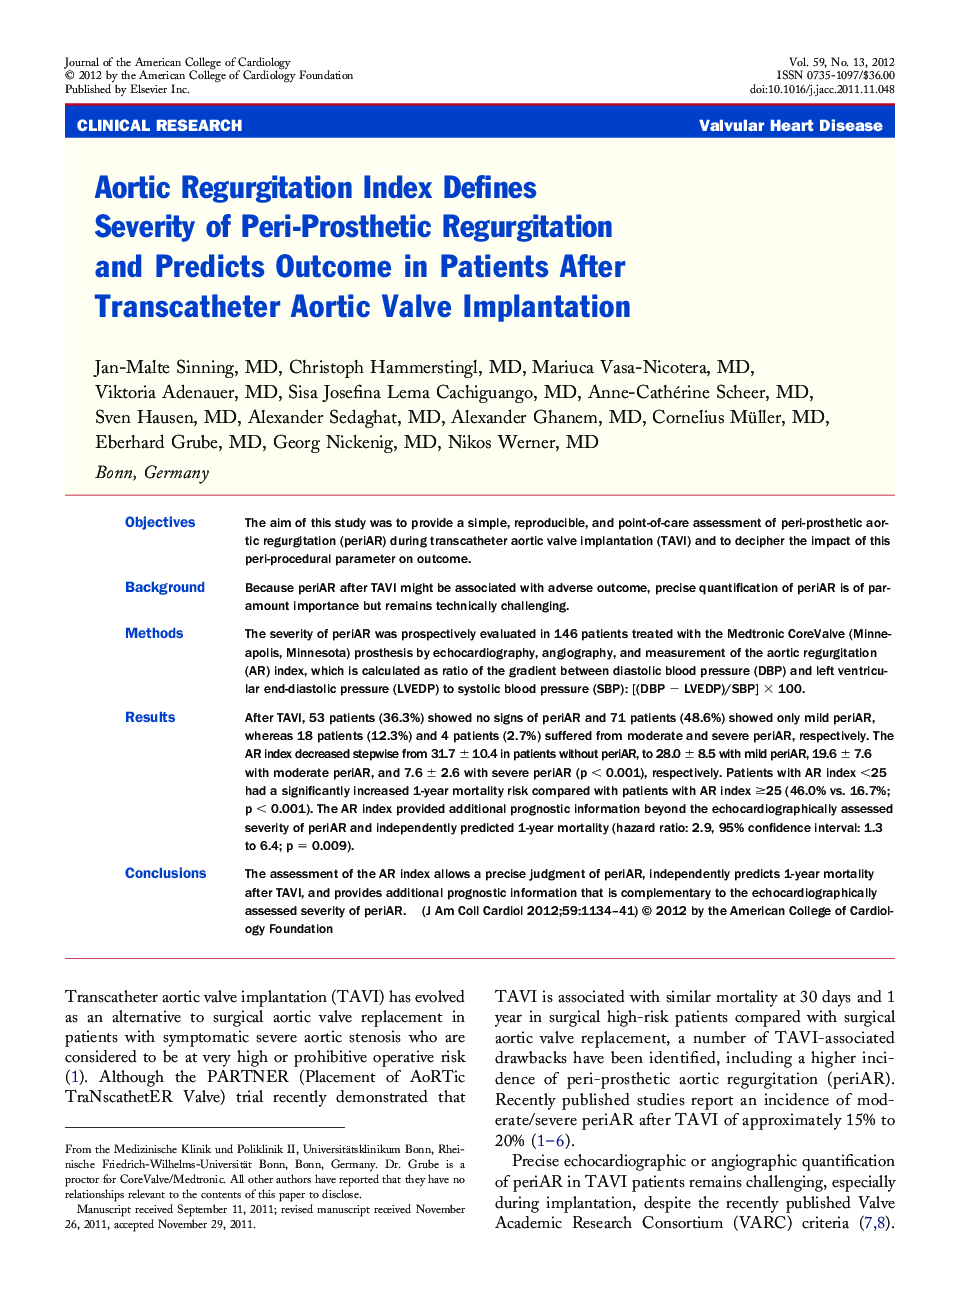 Aortic Regurgitation Index Defines Severity of Peri-Prosthetic Regurgitation and Predicts Outcome in Patients After Transcatheter Aortic Valve Implantation 